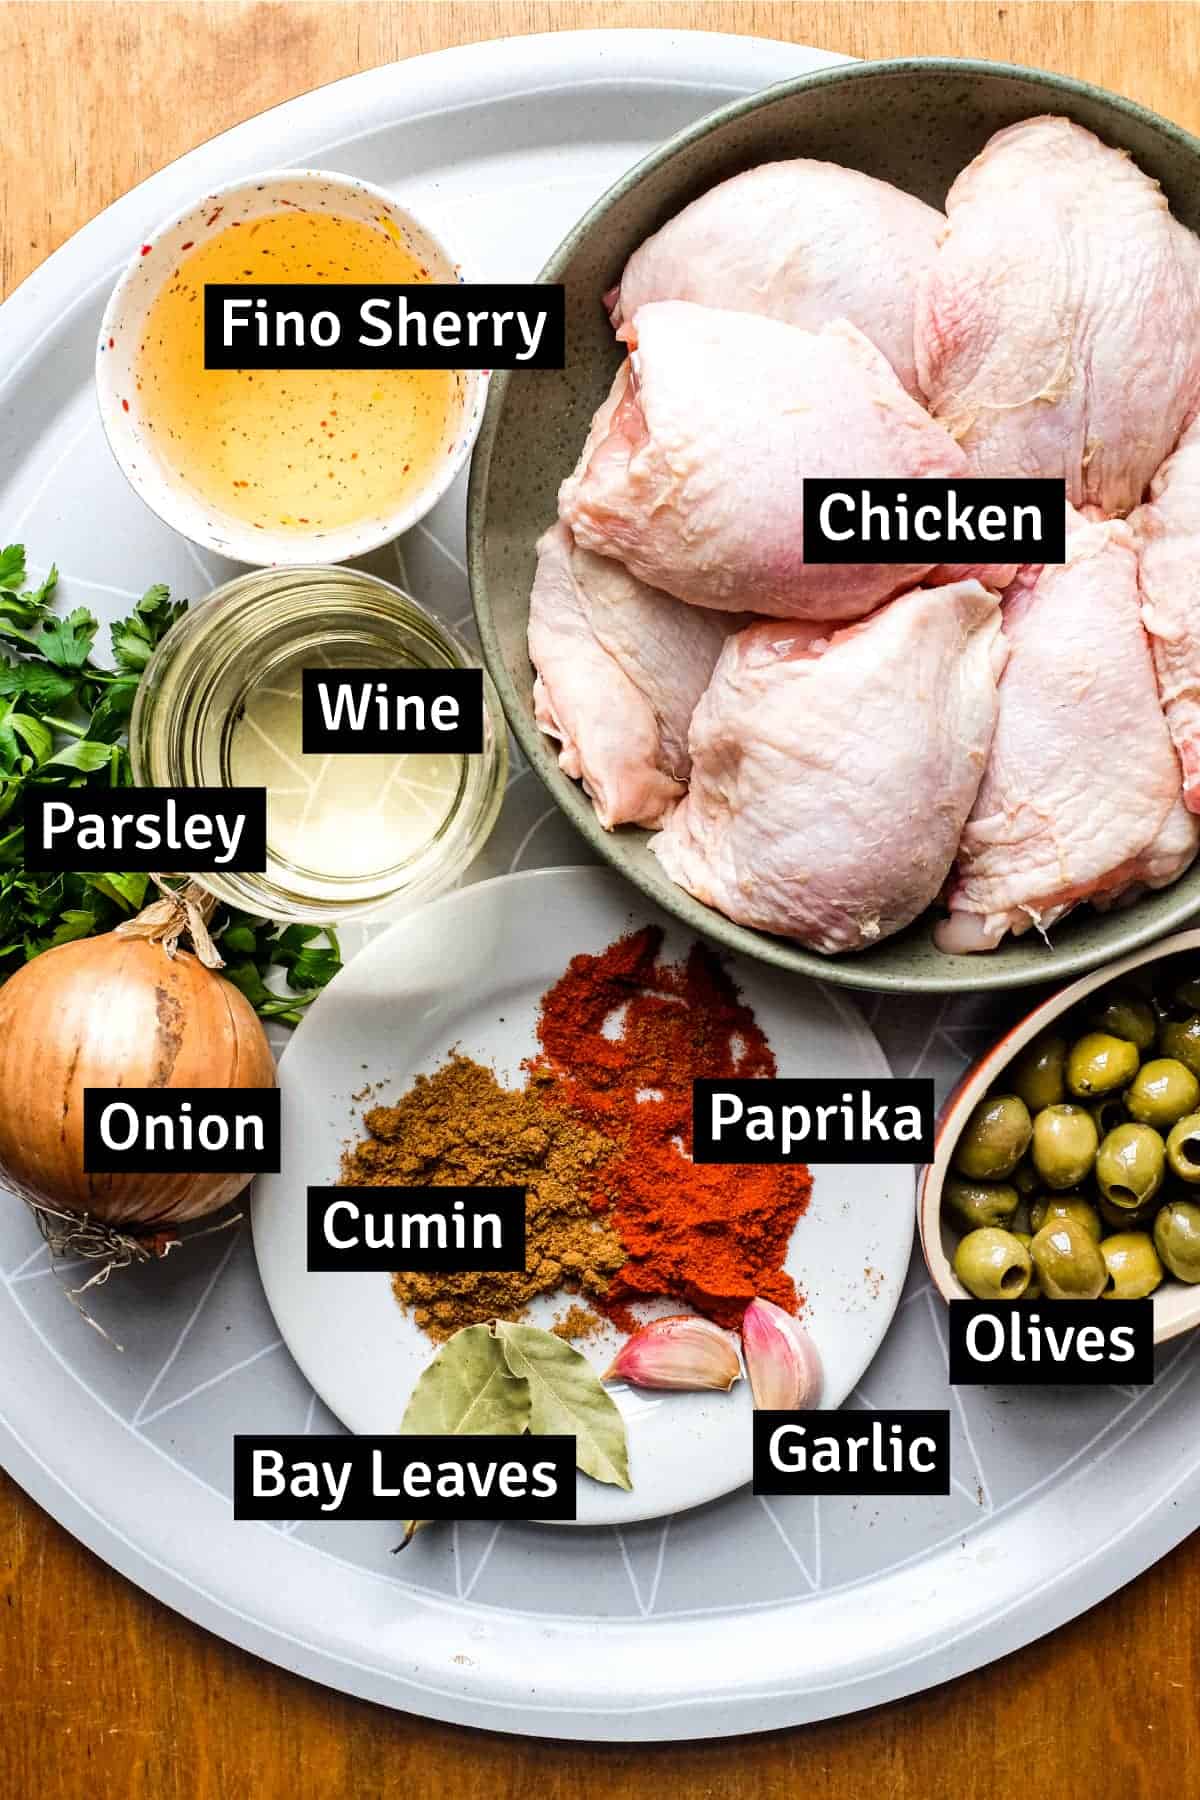 The ingredients for Spanish Chicken including chicken thighs, wine, sherry, onion, garlic, parsley, olives, paprika, cumin and bay leaf.